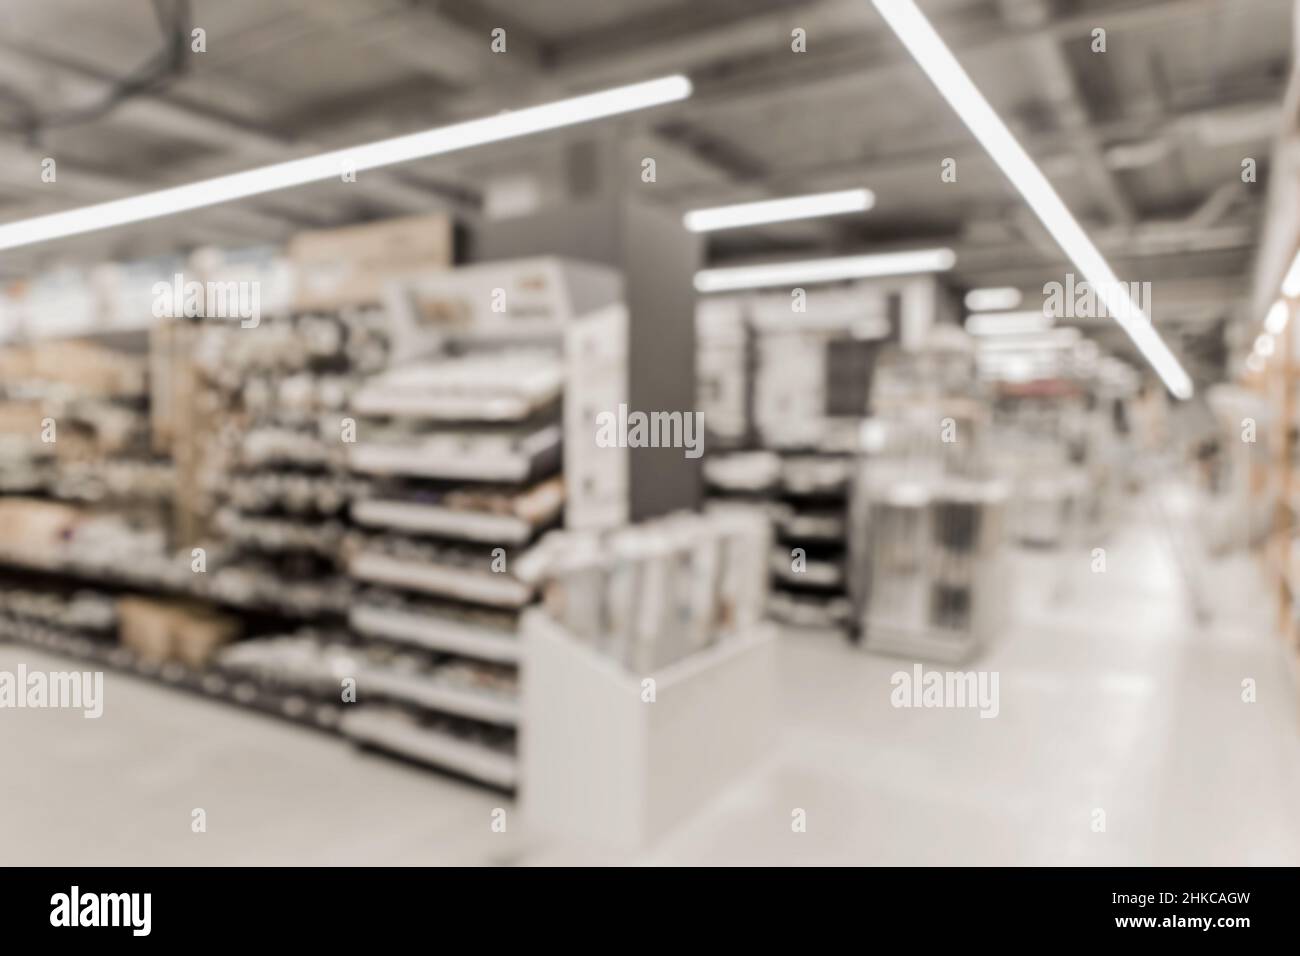 Blurry background of a hardware store with shelves and materials for interior and home design. Stock Photo